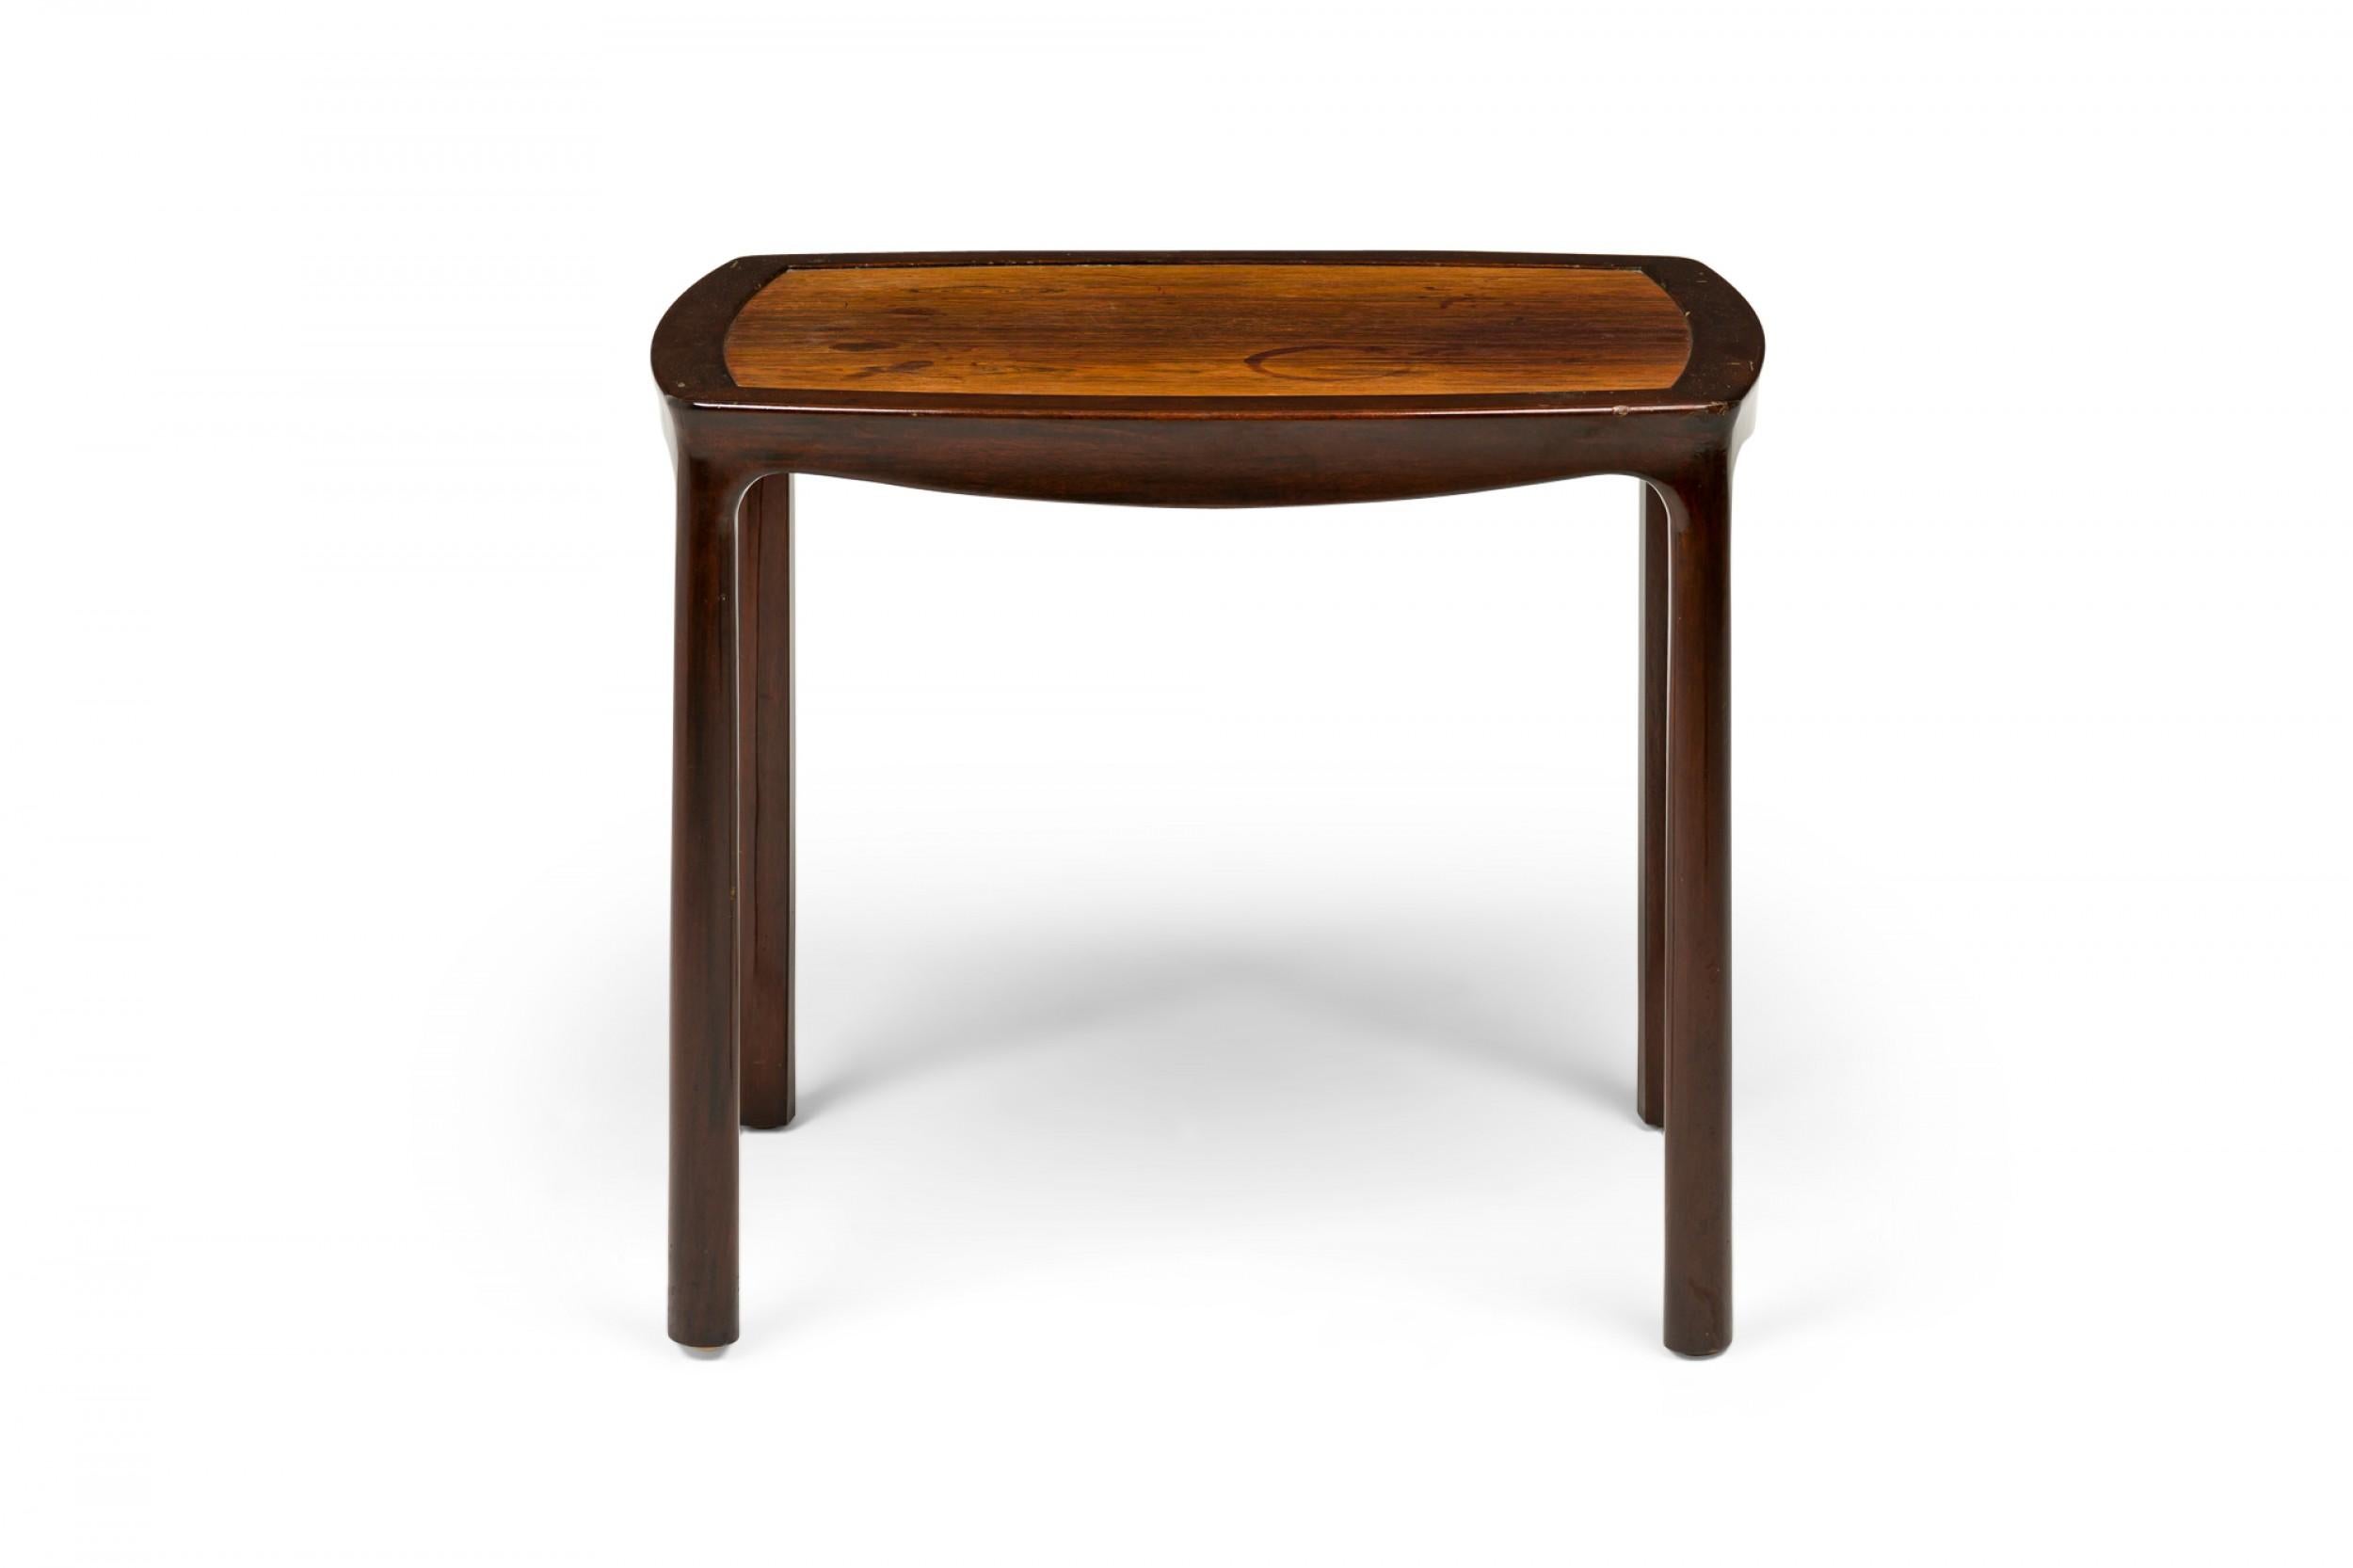 American mid-century end / side table with a slightly rounded rectangular top with a lighter stained wooden inset top supported by a darker wooden frame with a shaped apron with four rounded legs. (Edward Wormley for Dunbar Furniture